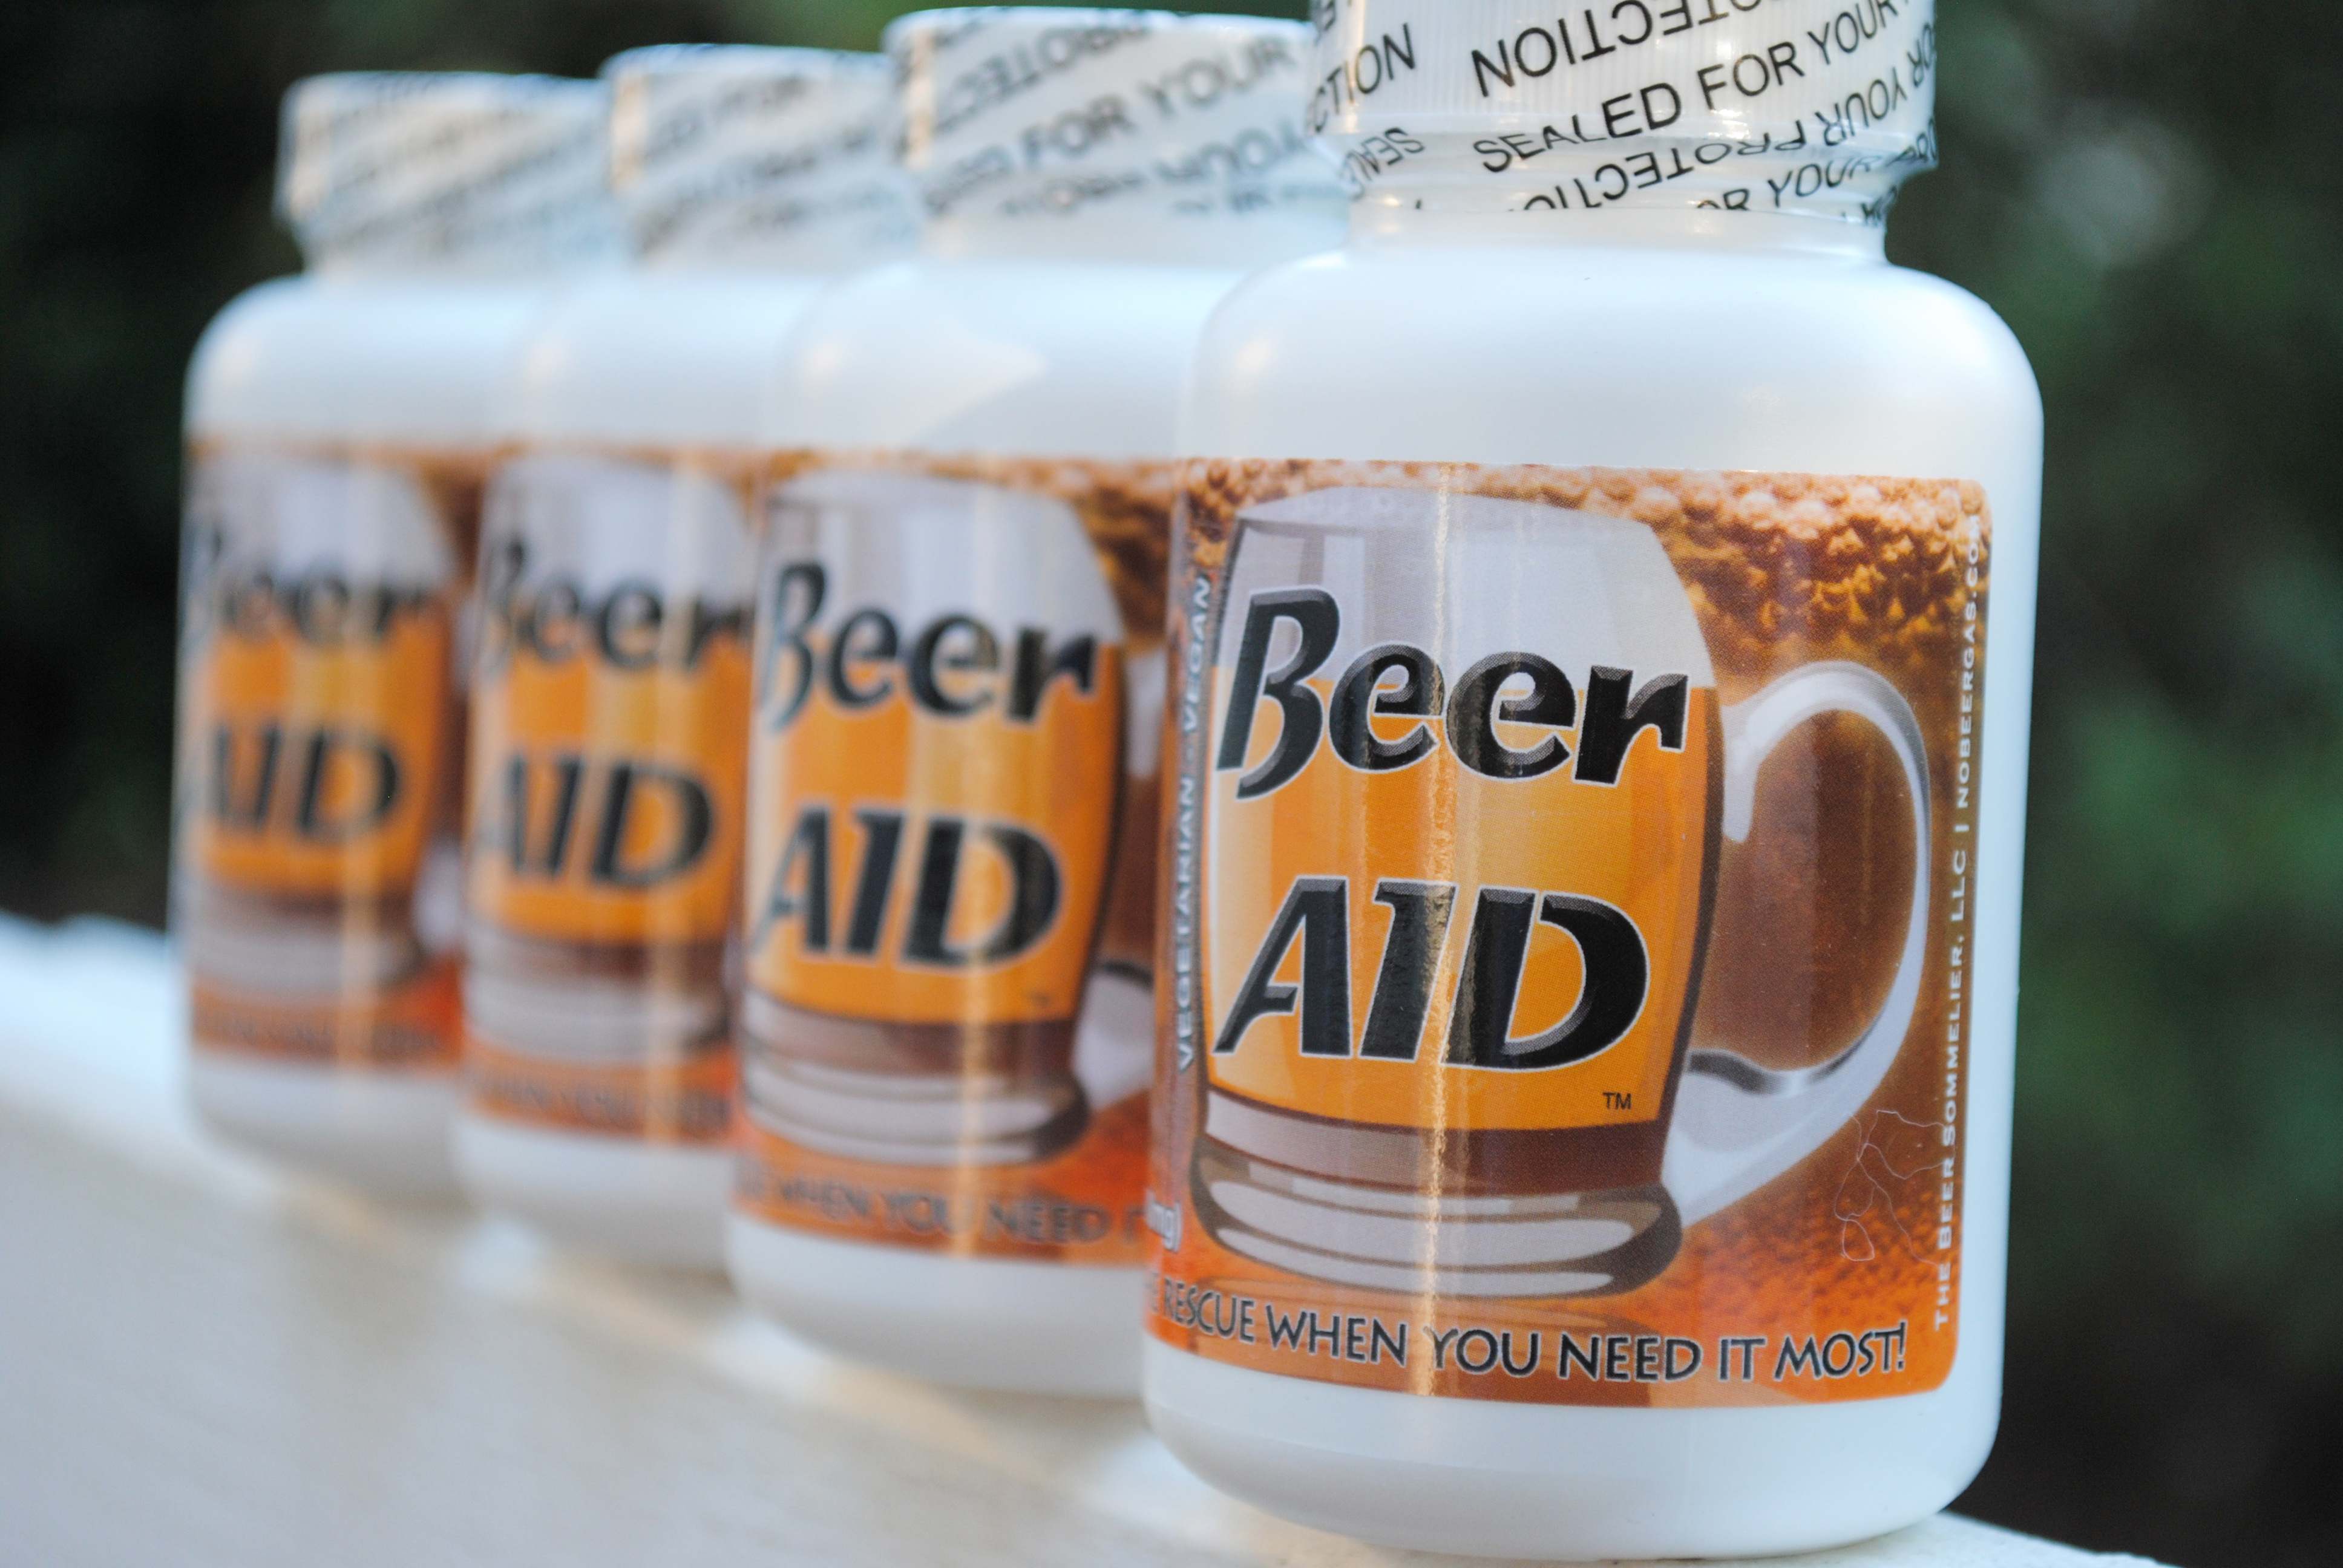 Beer AID - the first and only digestive supplement exclusively for beer drinkers.